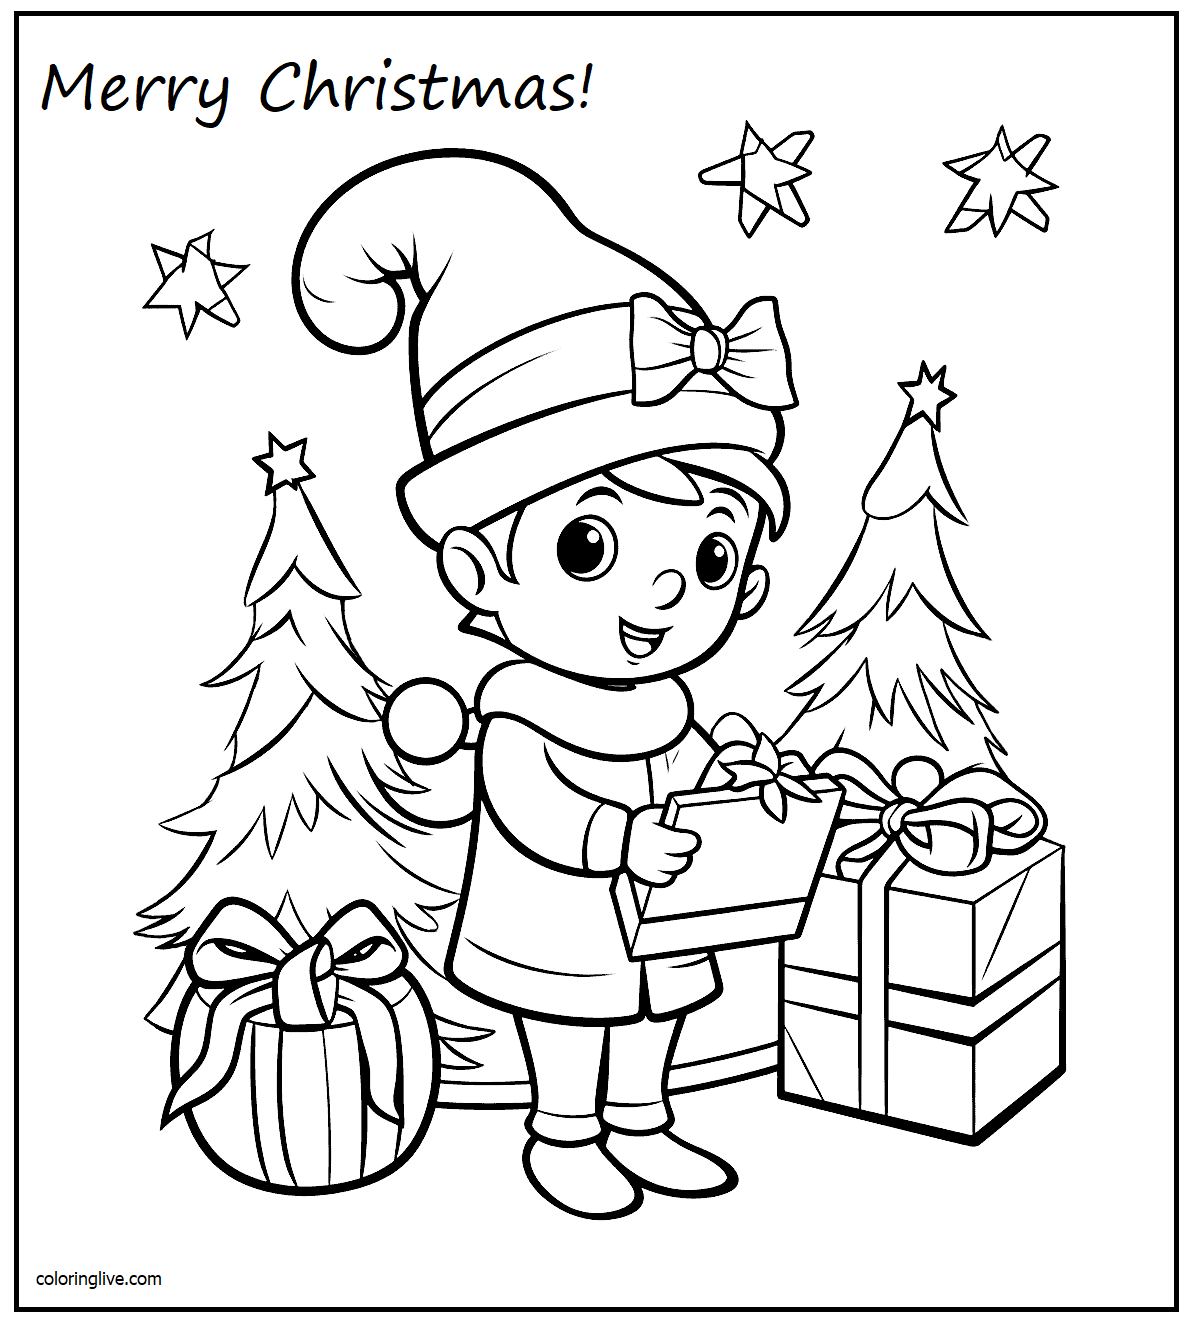 Printable Cute Christmas   7 Coloring Page for kids.